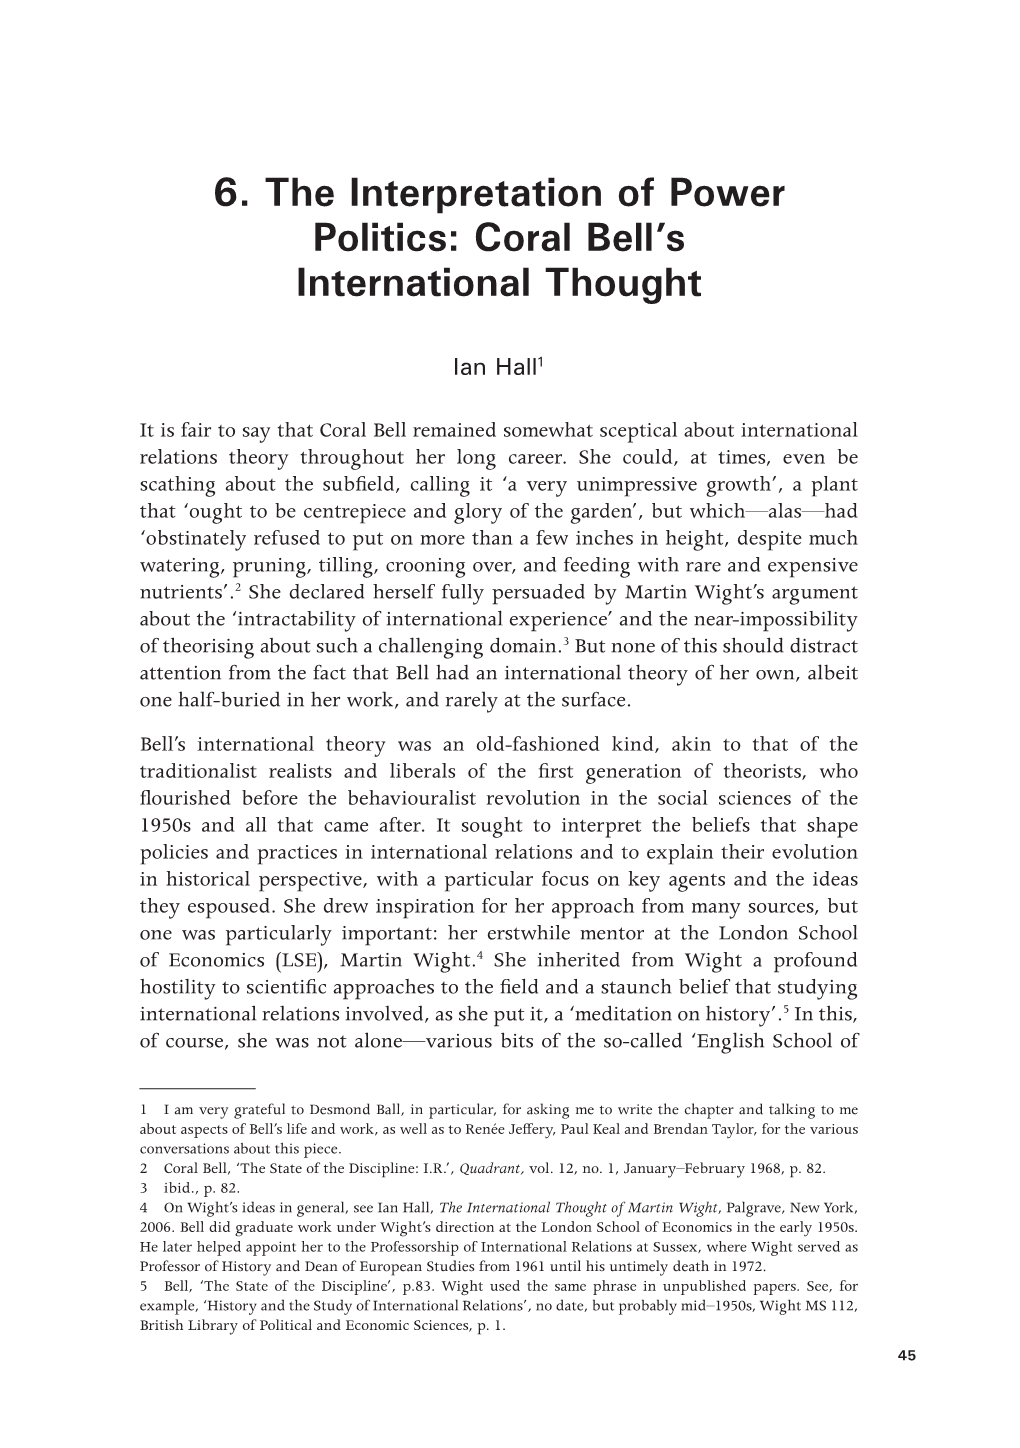 Coral Bell's International Thought